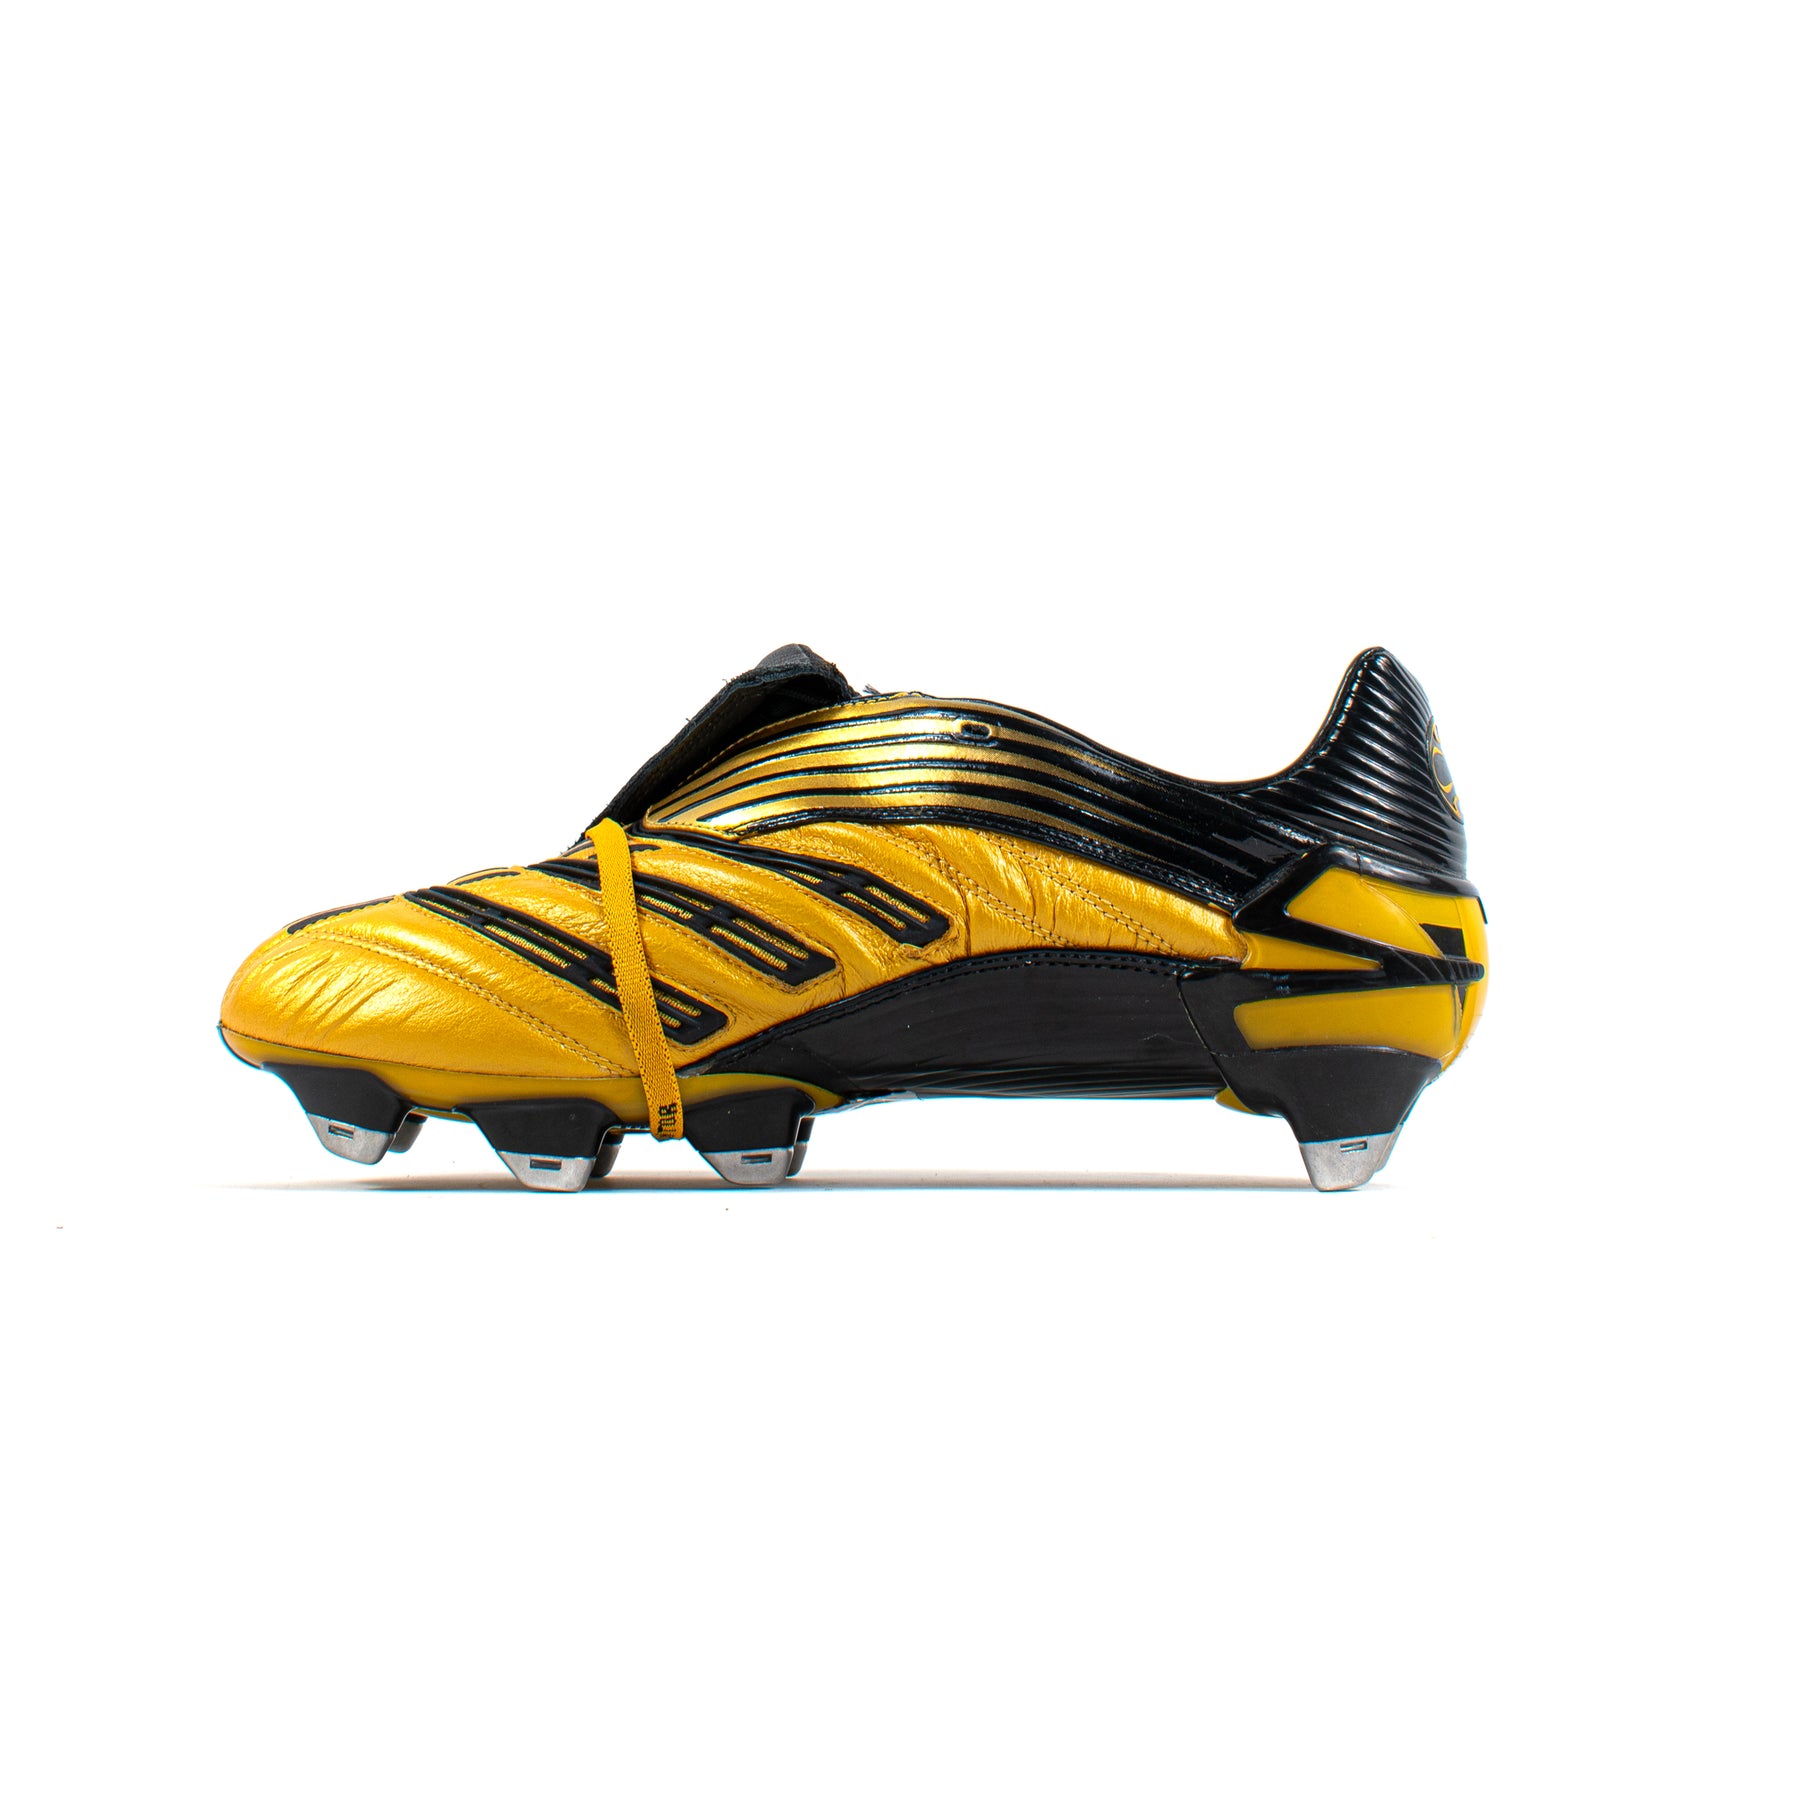 Absolute Gold Black SG – Classic Soccer Cleats